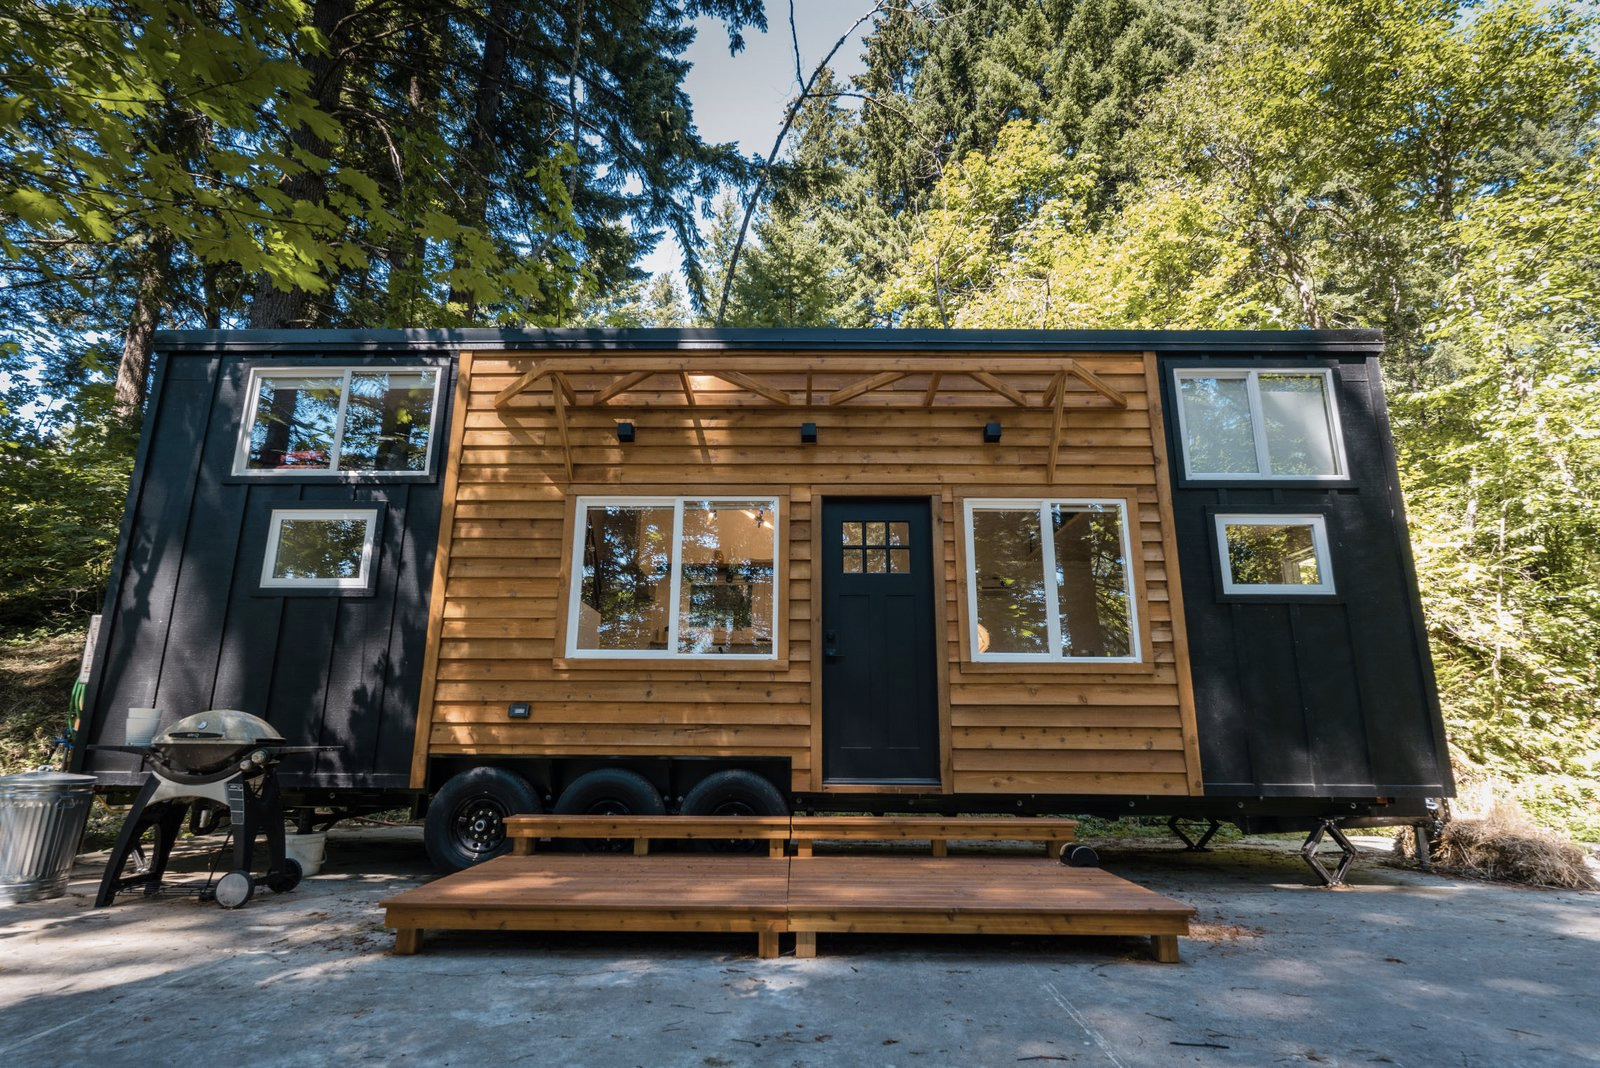 A ‘Scandinese’ tiny home trailer is for sale in Portland